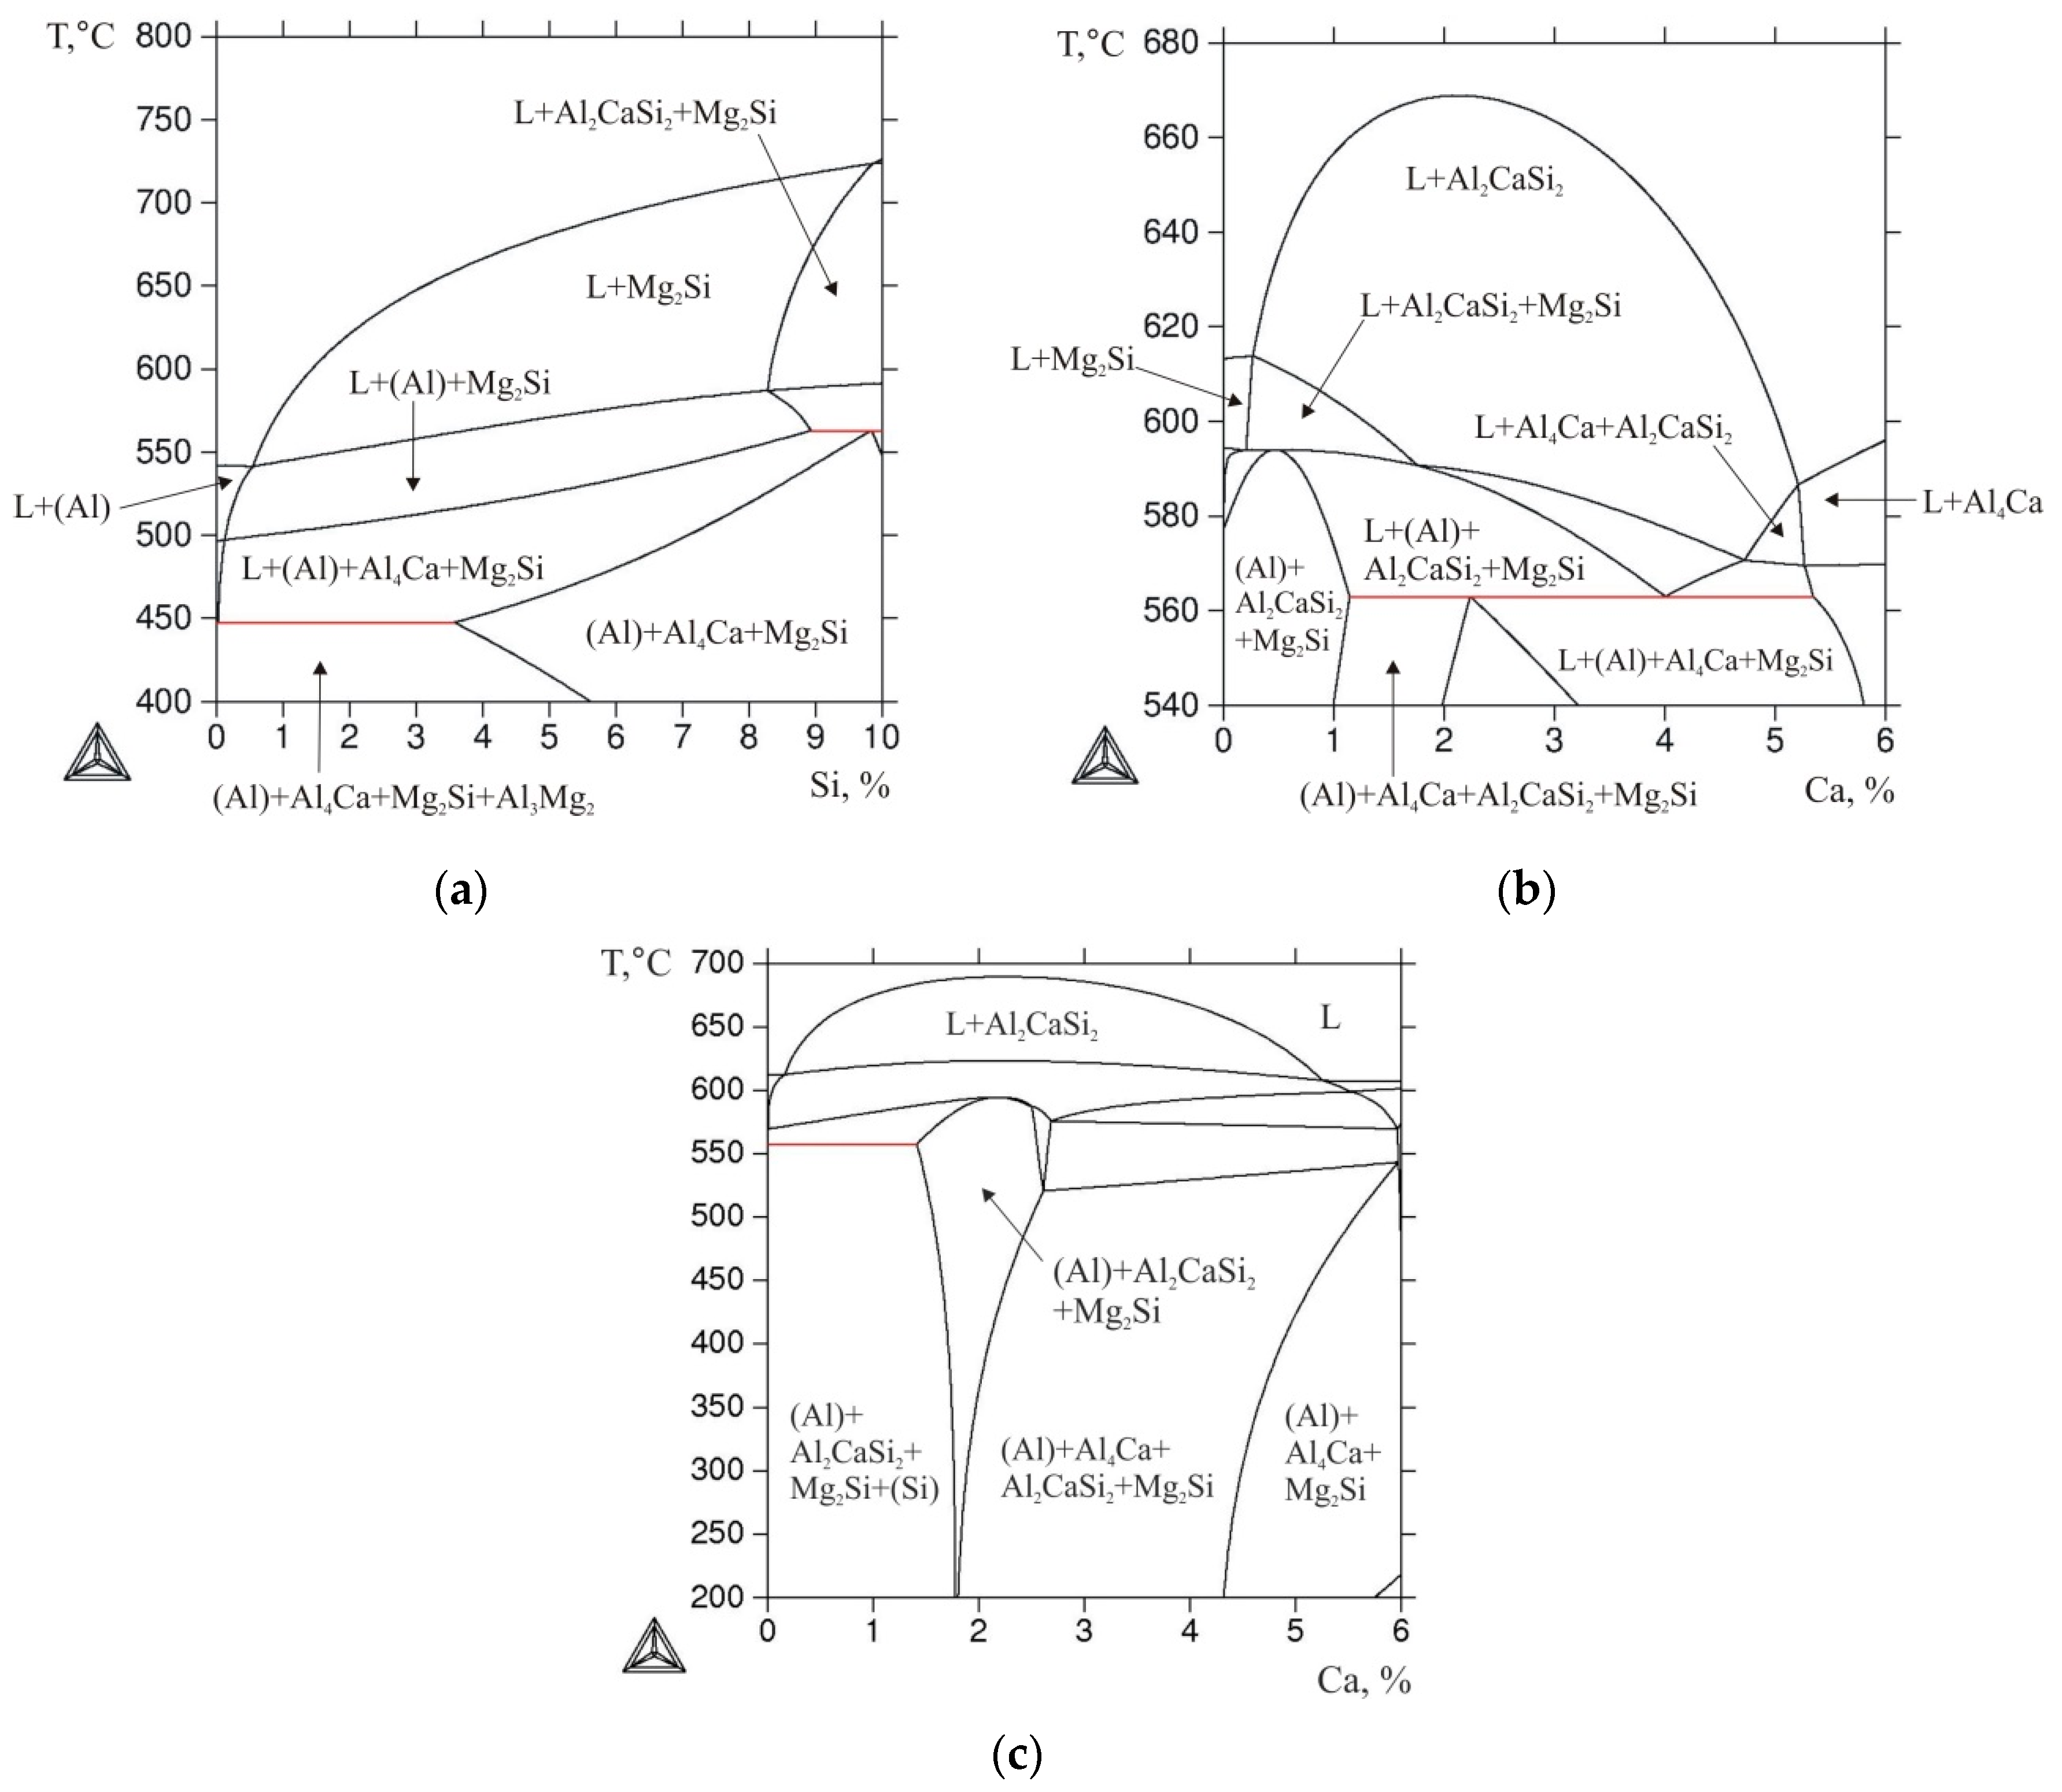 Metals | Free Full-Text | Phase Diagram of Al-Ca-Mg-Si System and Its Application the Design of Aluminum Alloys with High Magnesium Content